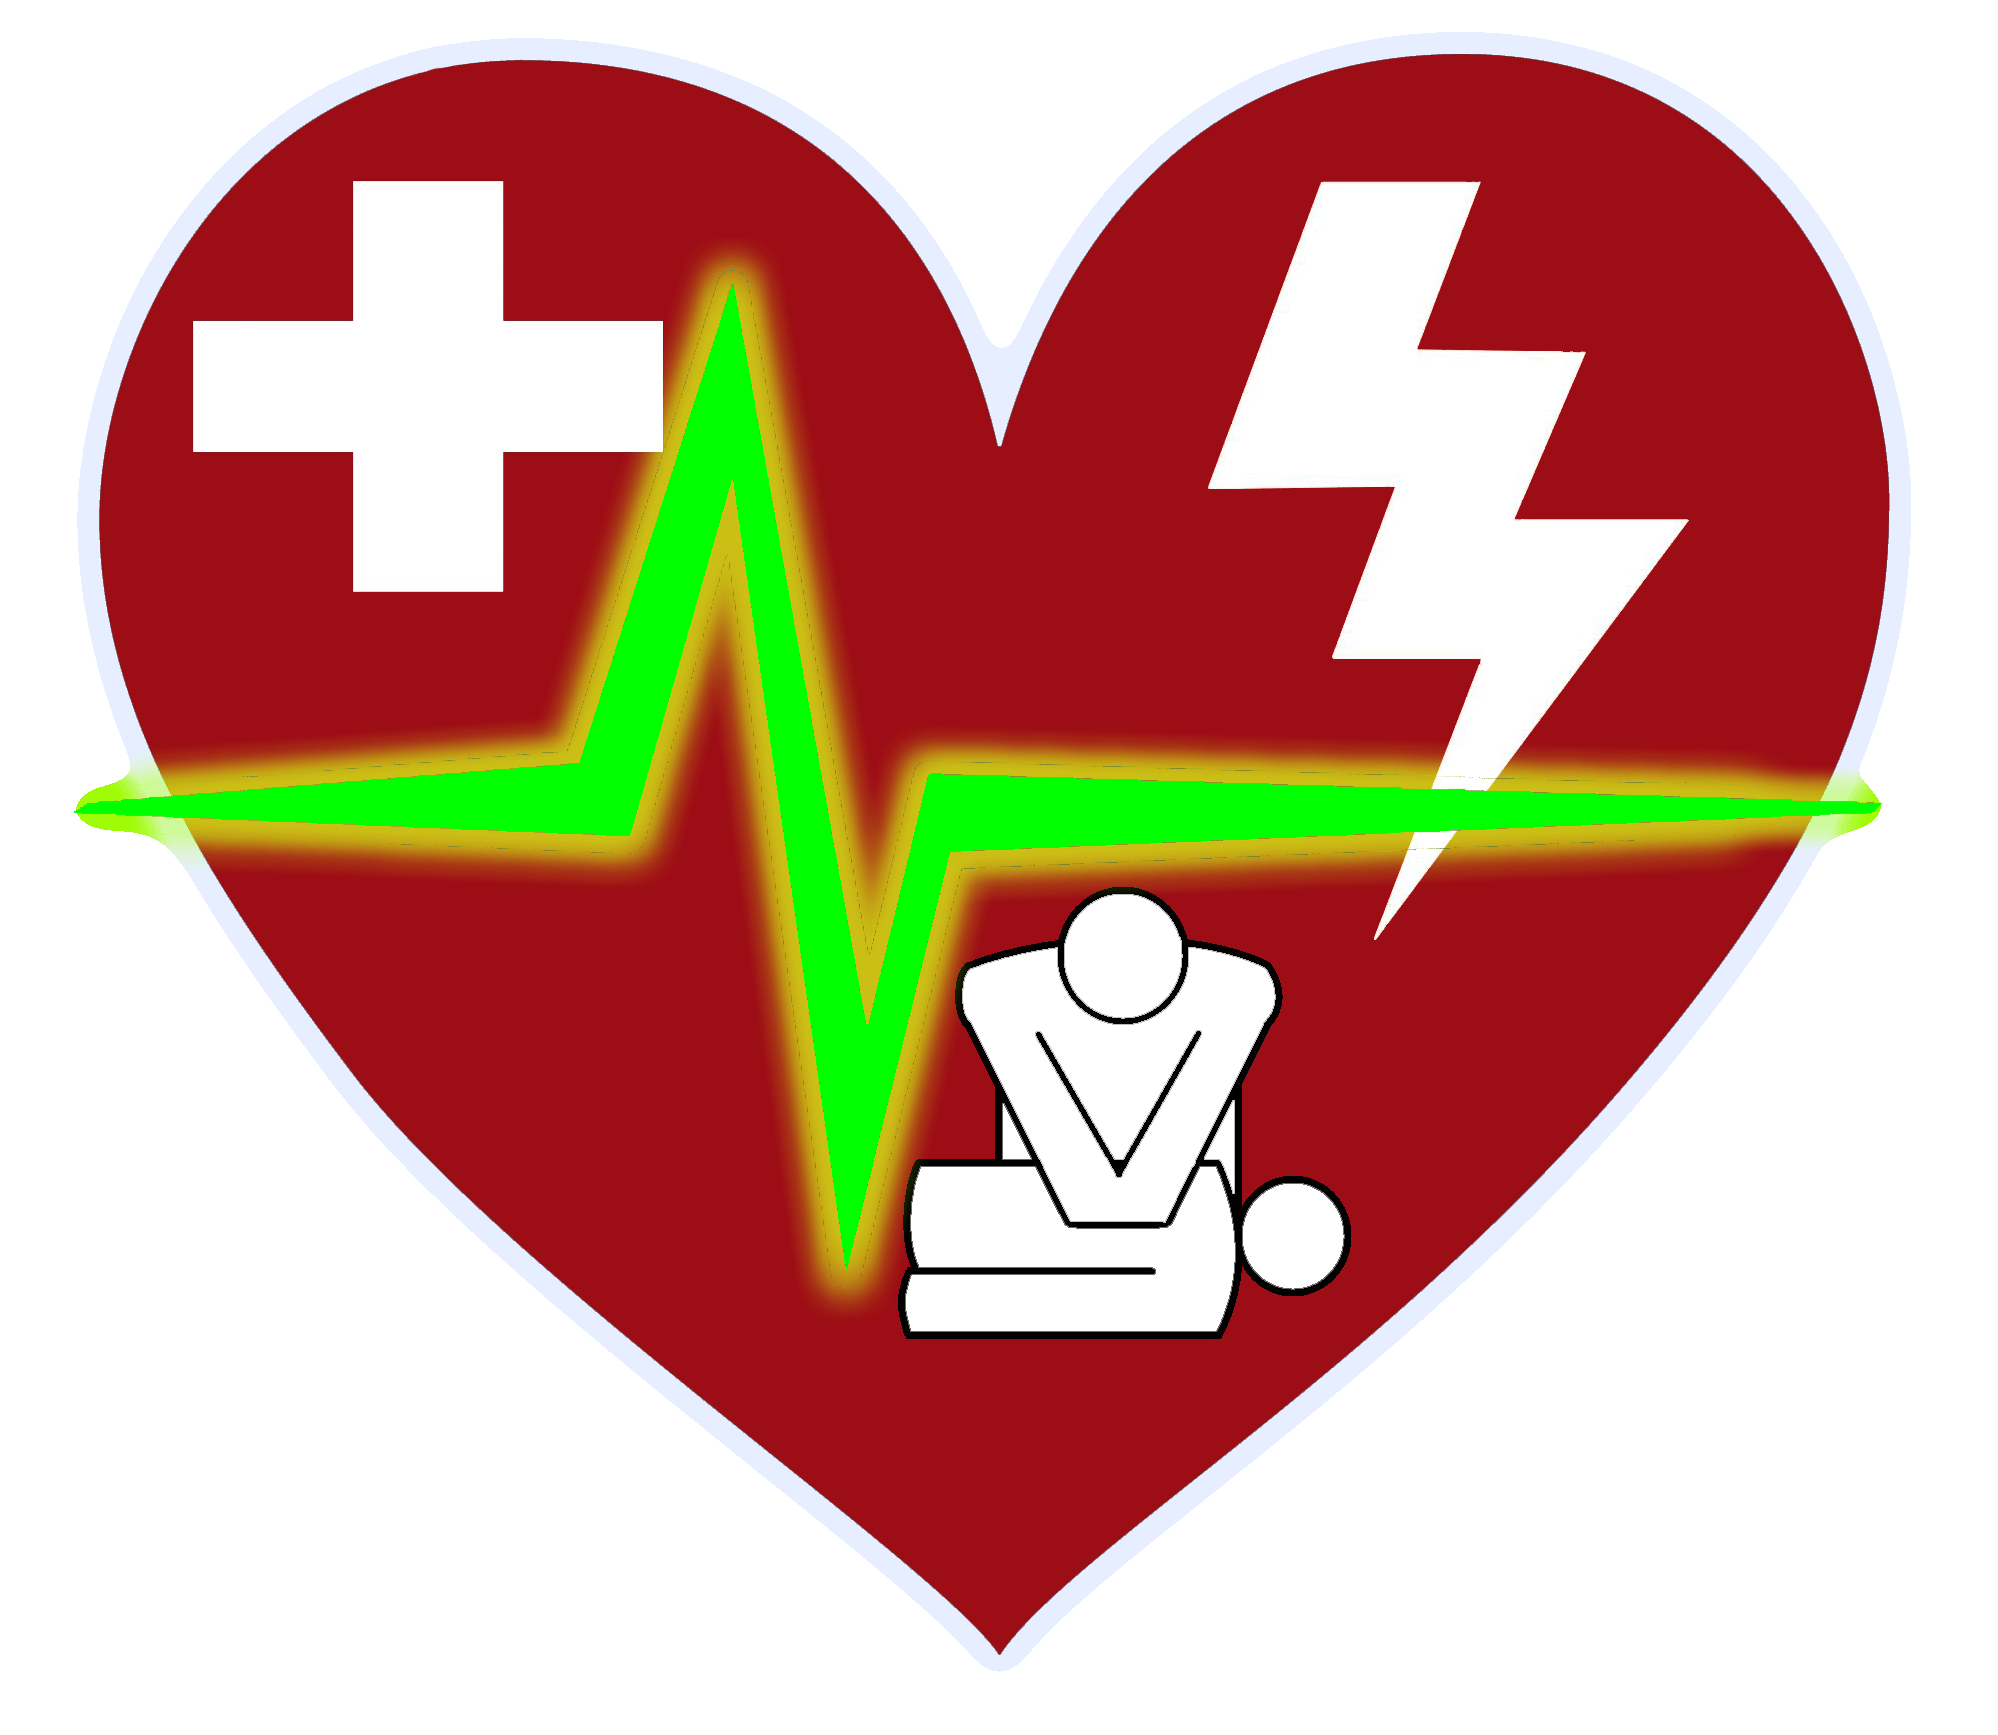 Foremost solutions classes cpr. Fight clipart defensive